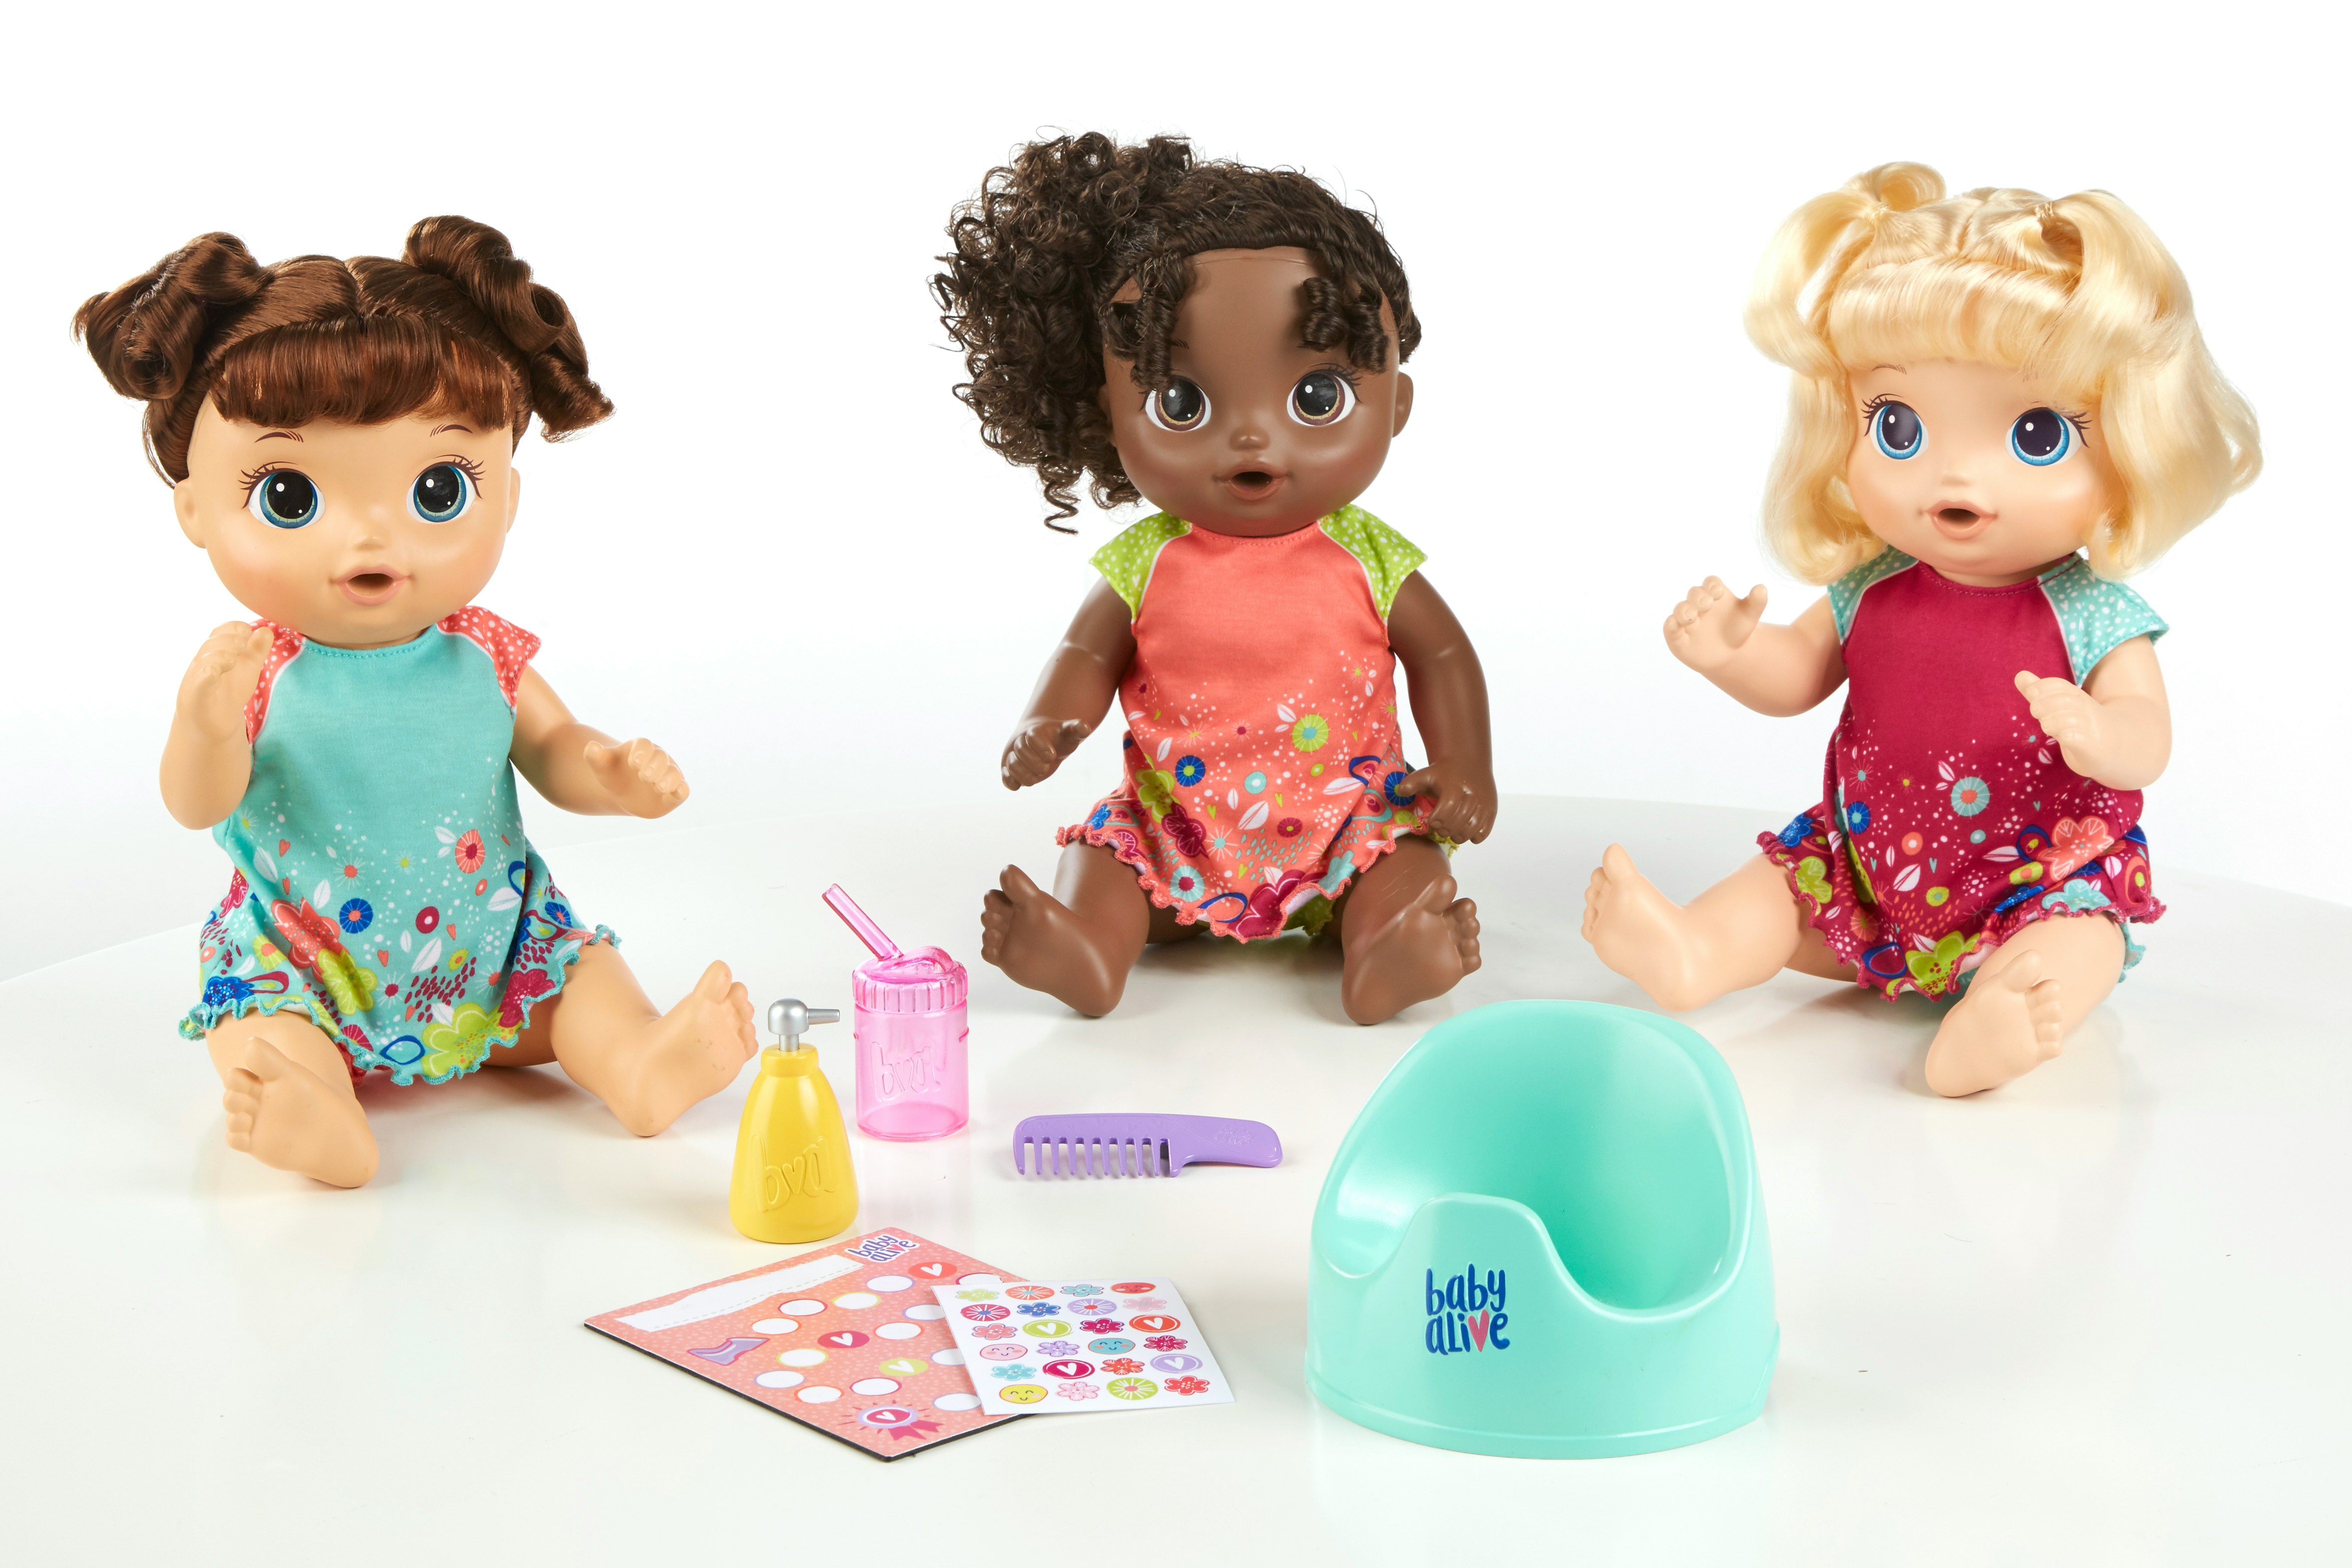 The New Baby Alive Potty Dance Doll Is Going To Be A MustHave Toy In 2018